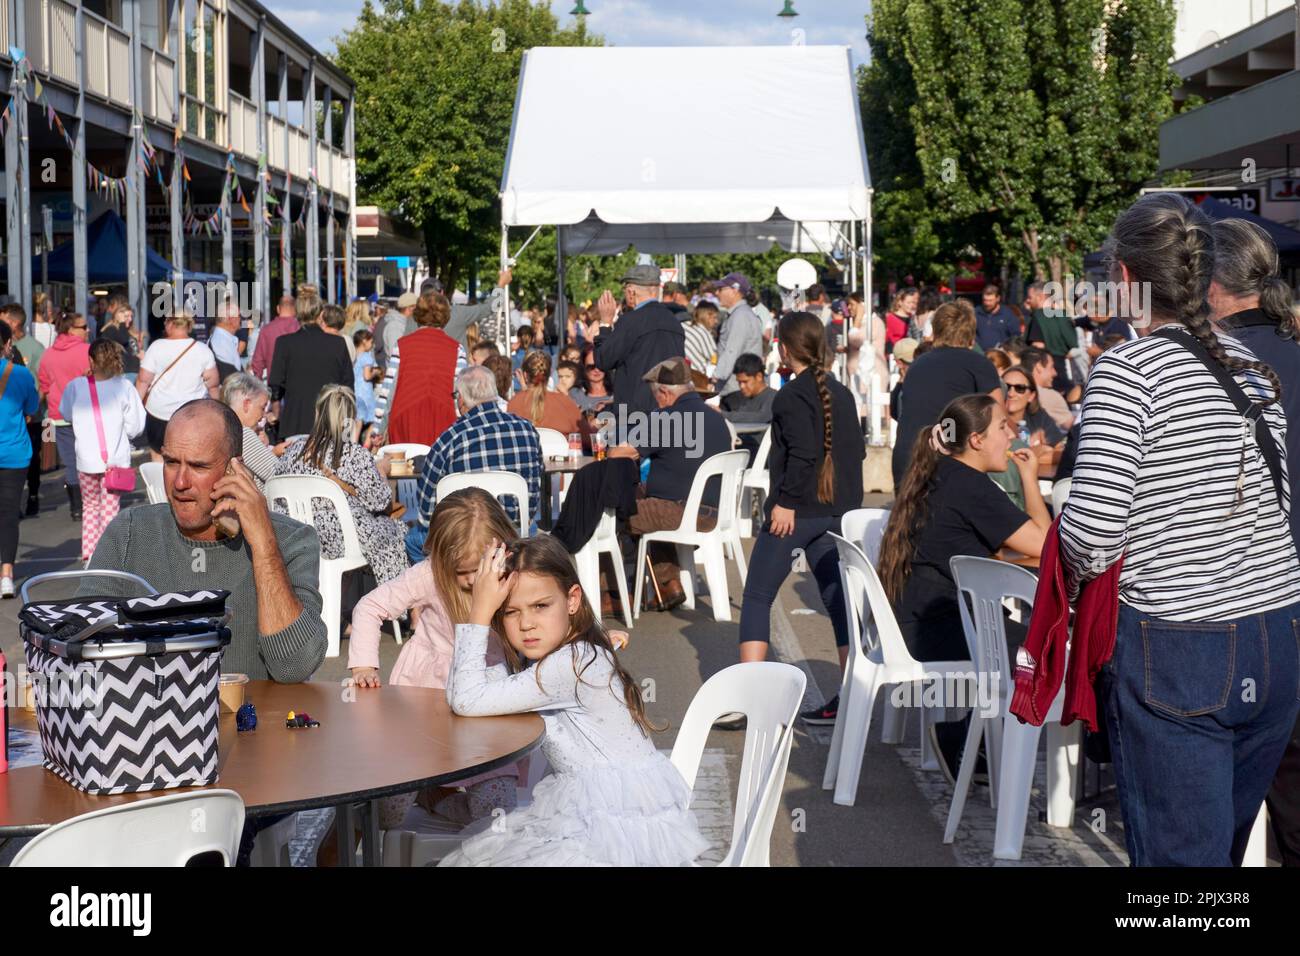 Kyabram Victoria Australia, Pictures of groups of people at the Kyabram Tastes and Tunes street festival. Stock Photo